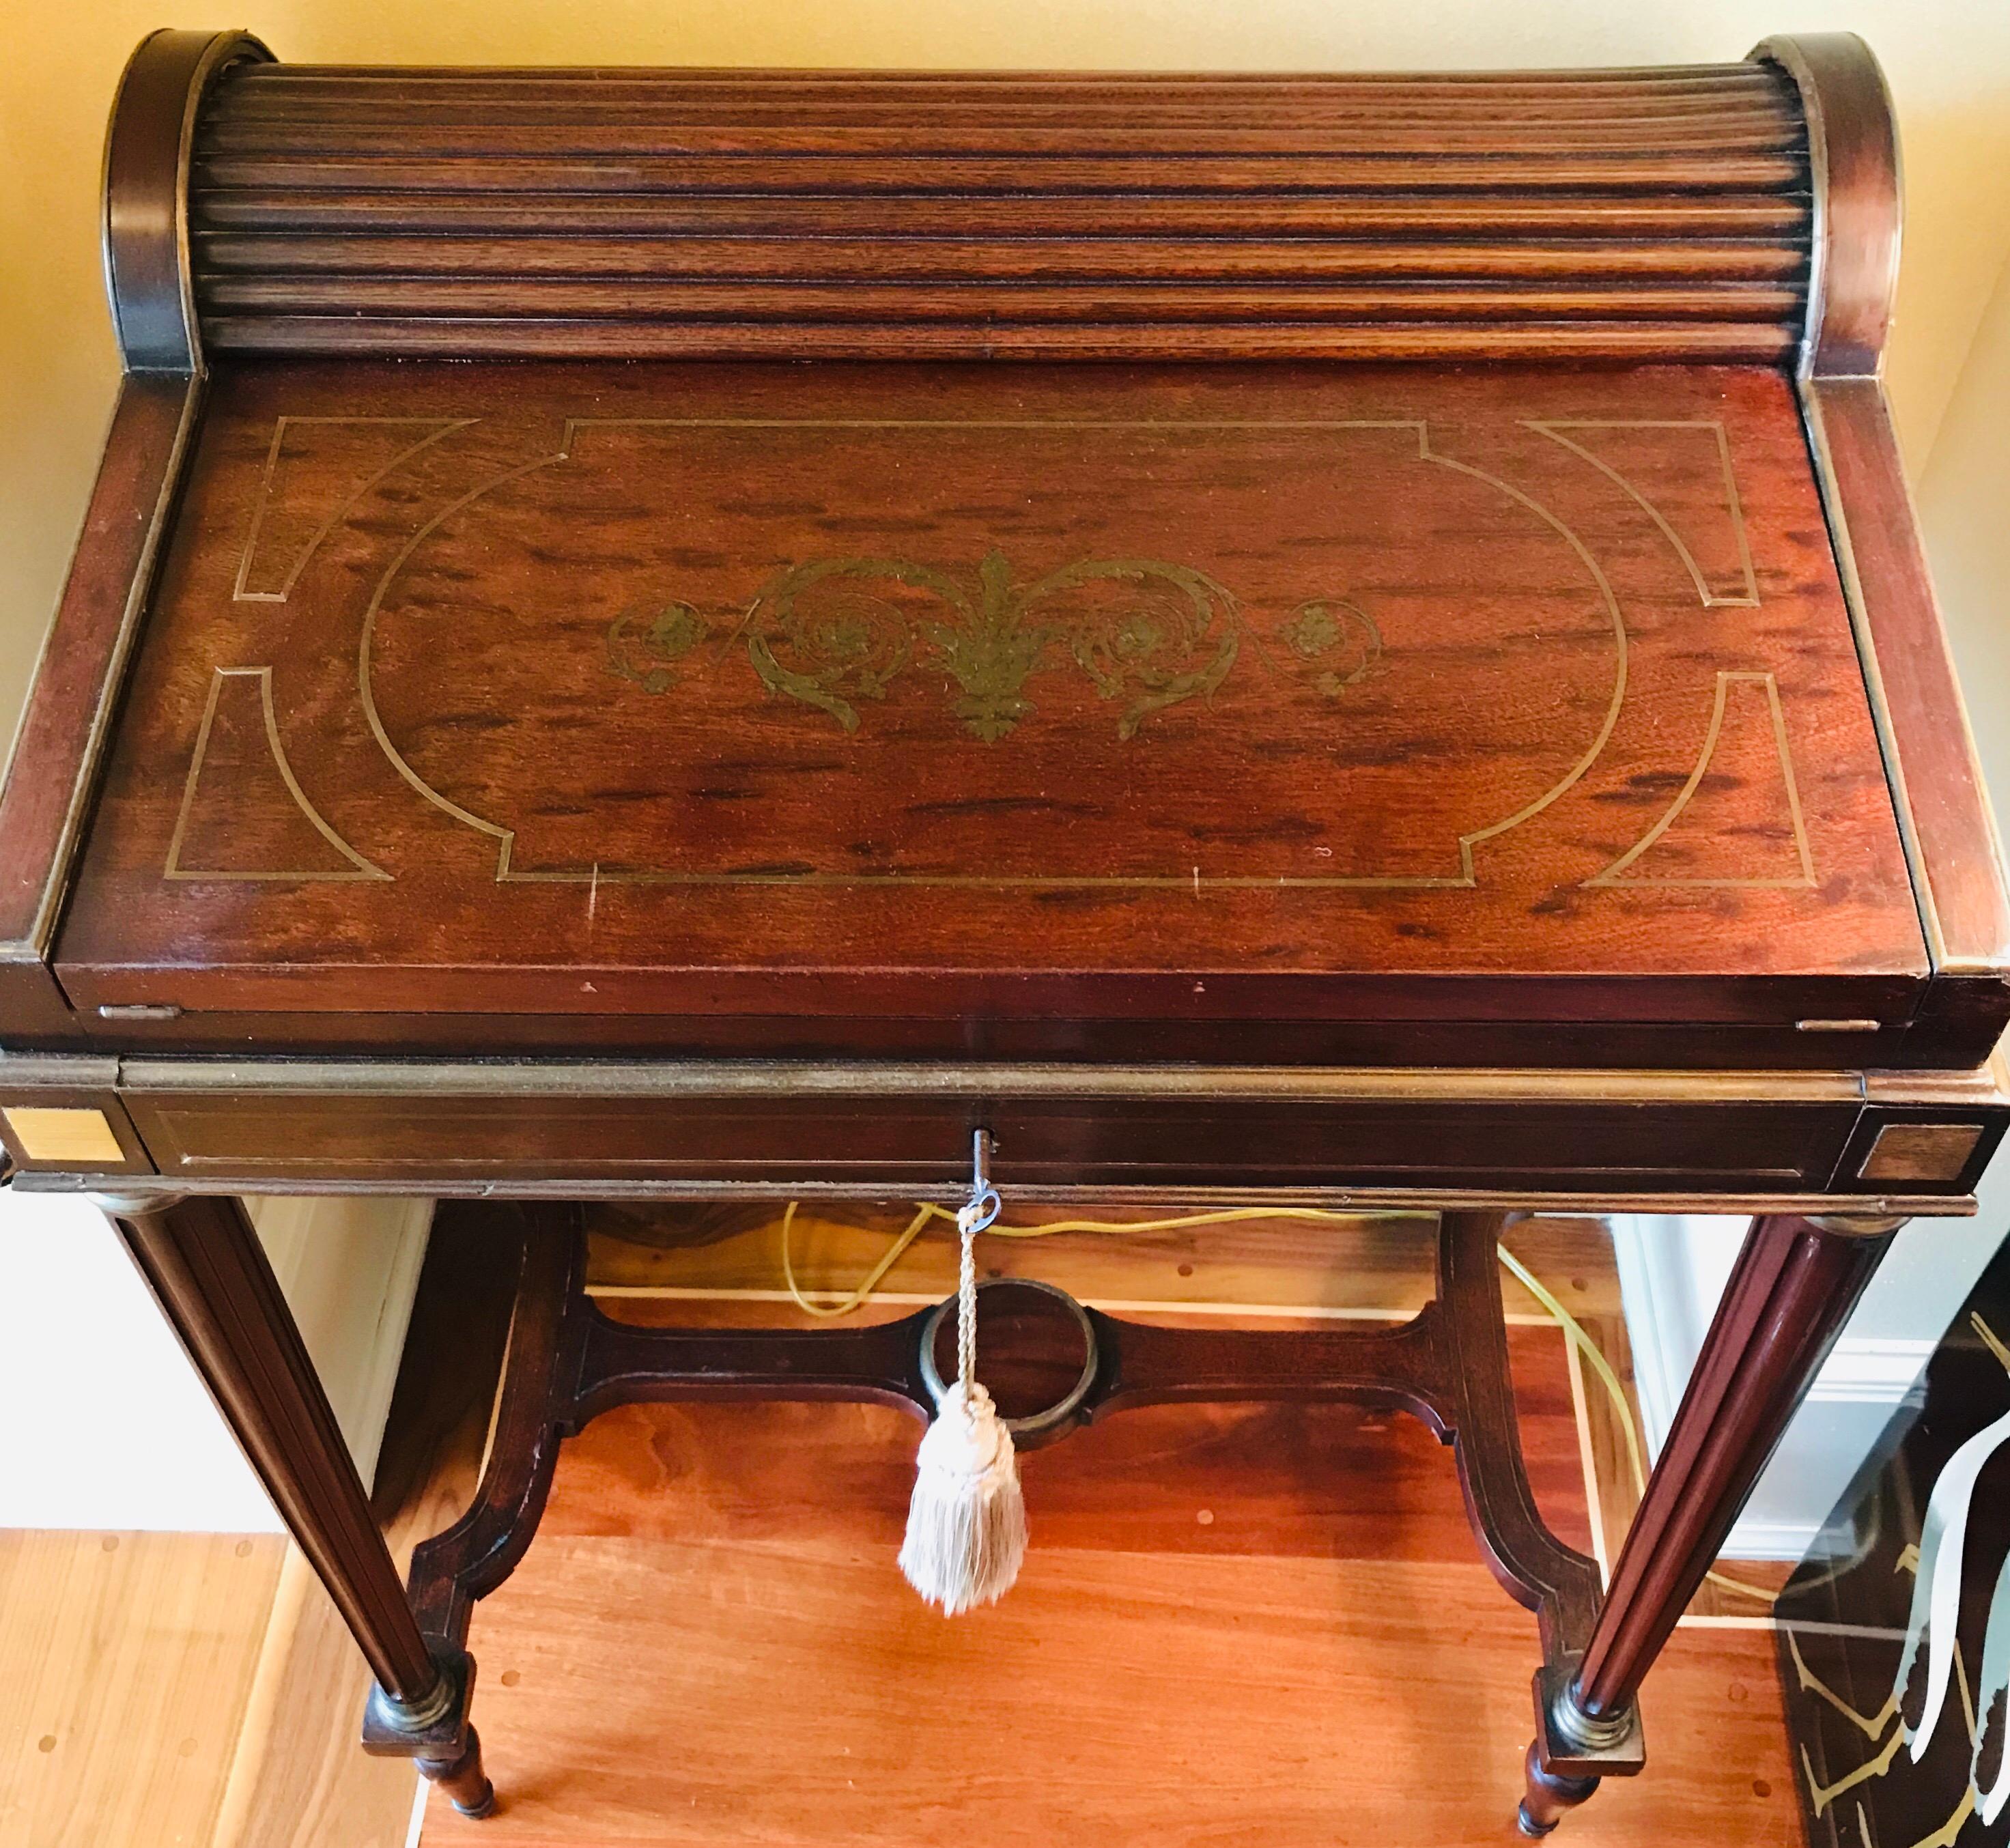 Exquisitely detailed late 18th century French rosewood Campaign style writing desk, inlaid with brass arabesque scroll work and enhanced with brass fittings joining the legs to the body legs and applied to the feet. This museum-worthy piece has a